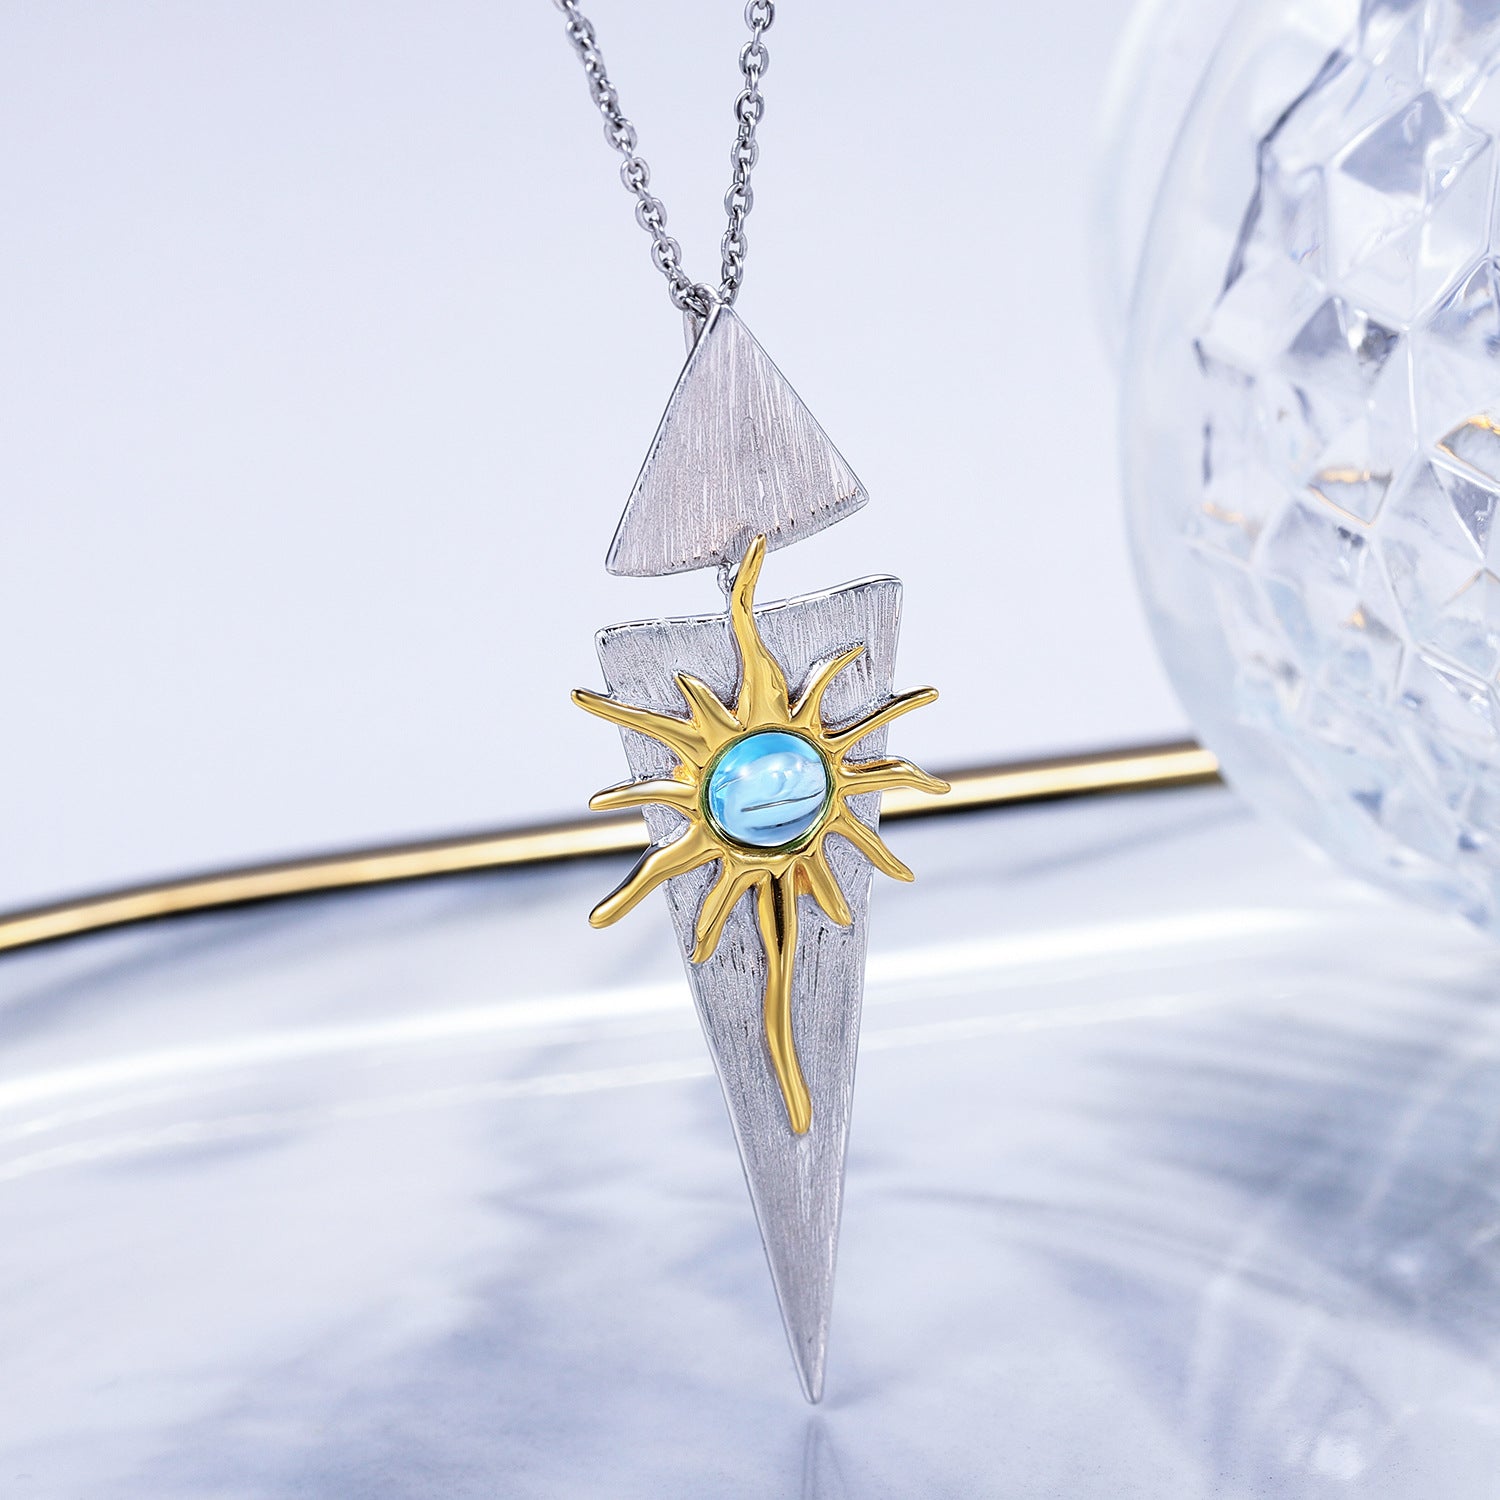 Creative-niche Design Jewelry Inlaid Colourful Gemstone Sun Goddess Pendant Sterling Silver Necklace for Women